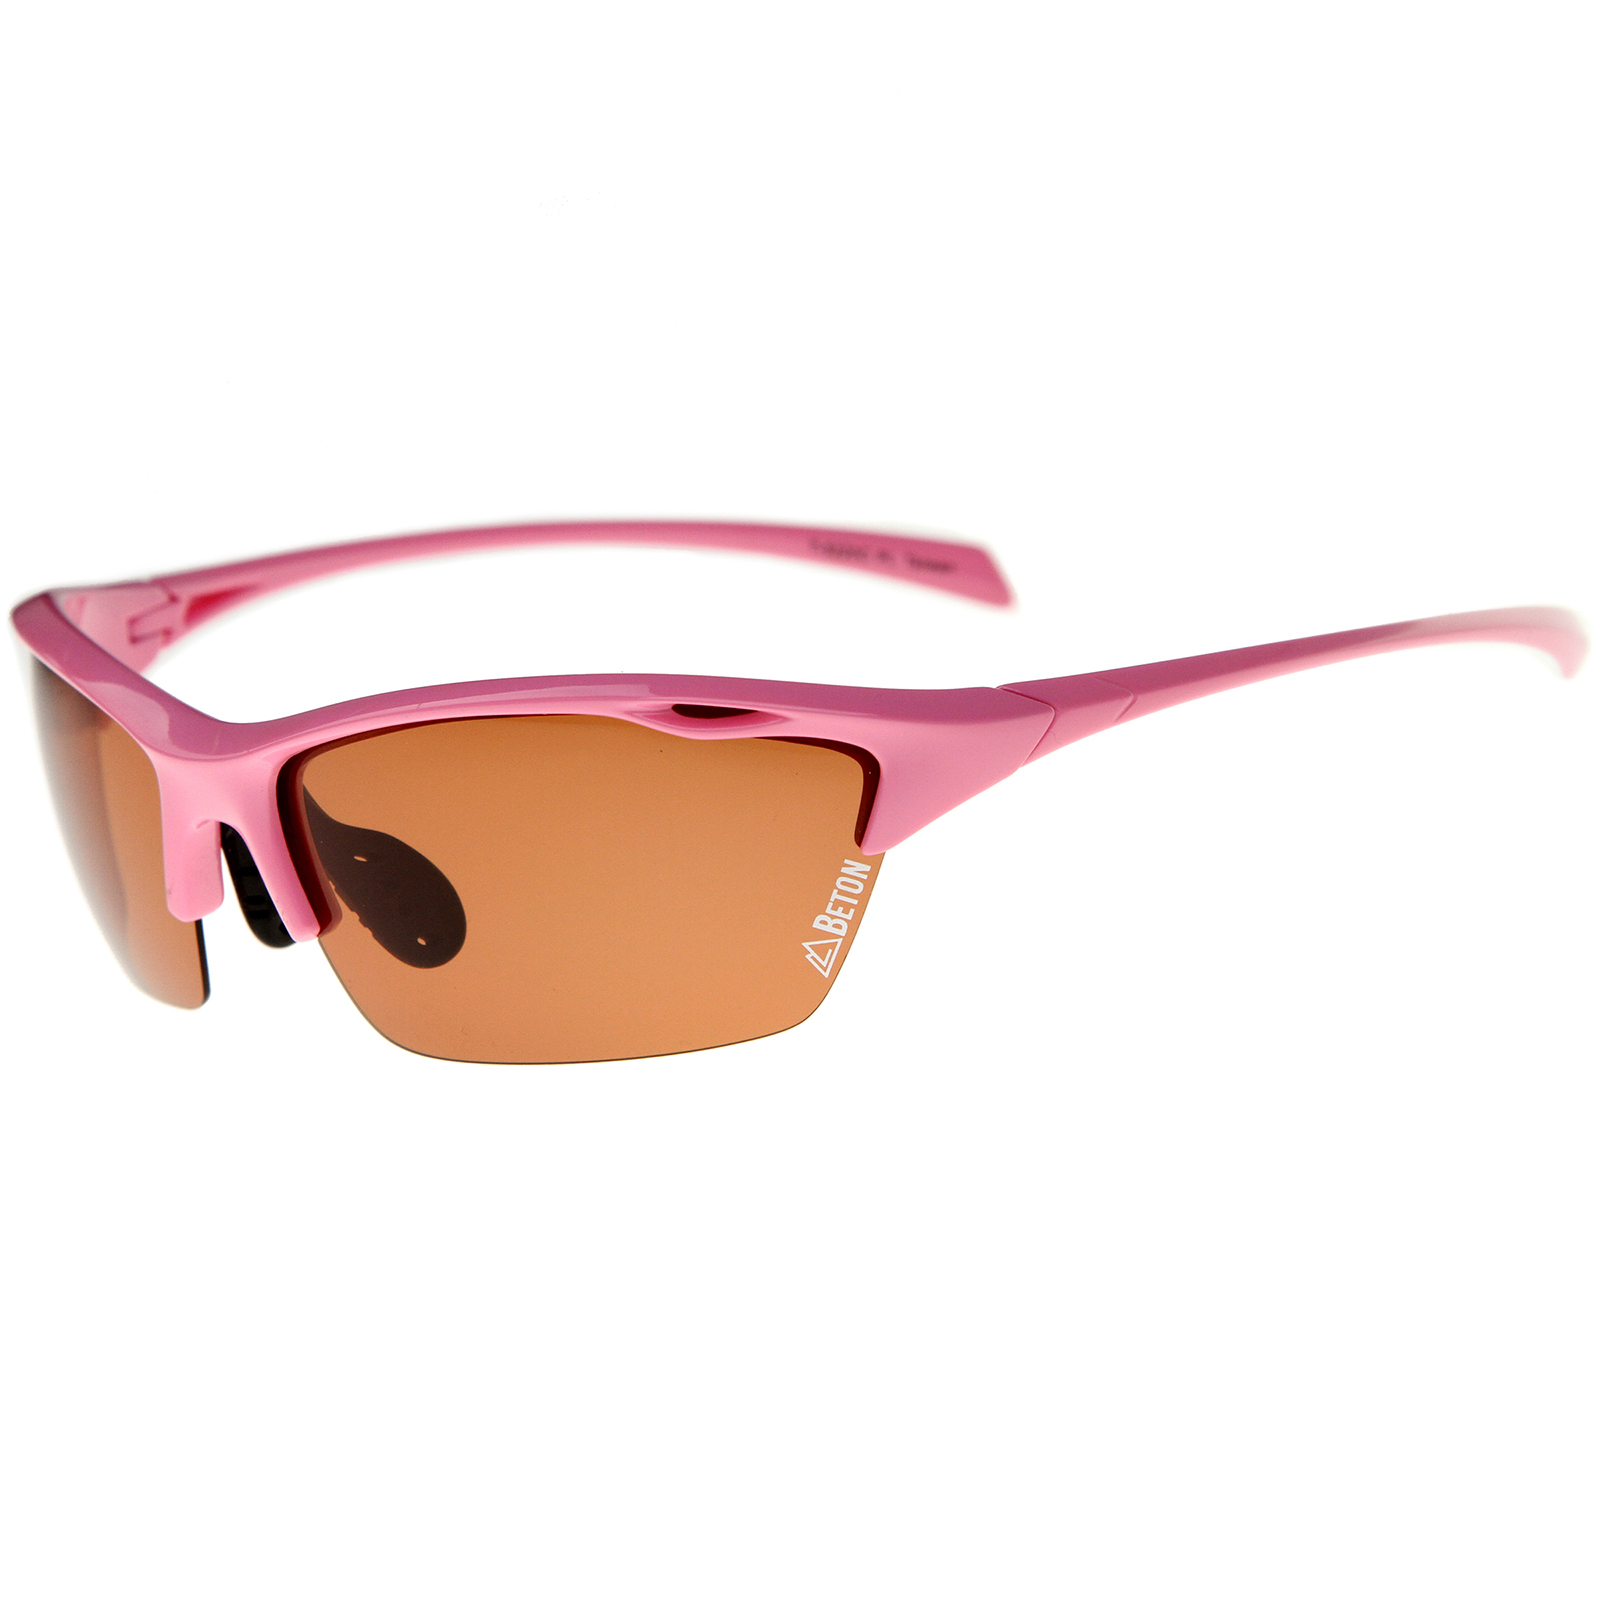 Beton Male Wakely - Polarized Shatterproof Lens Half-Frame TR-90 Sports Wrap Sunglasses (Shiny Pink / Brown) - 68mm - image 1 of 6